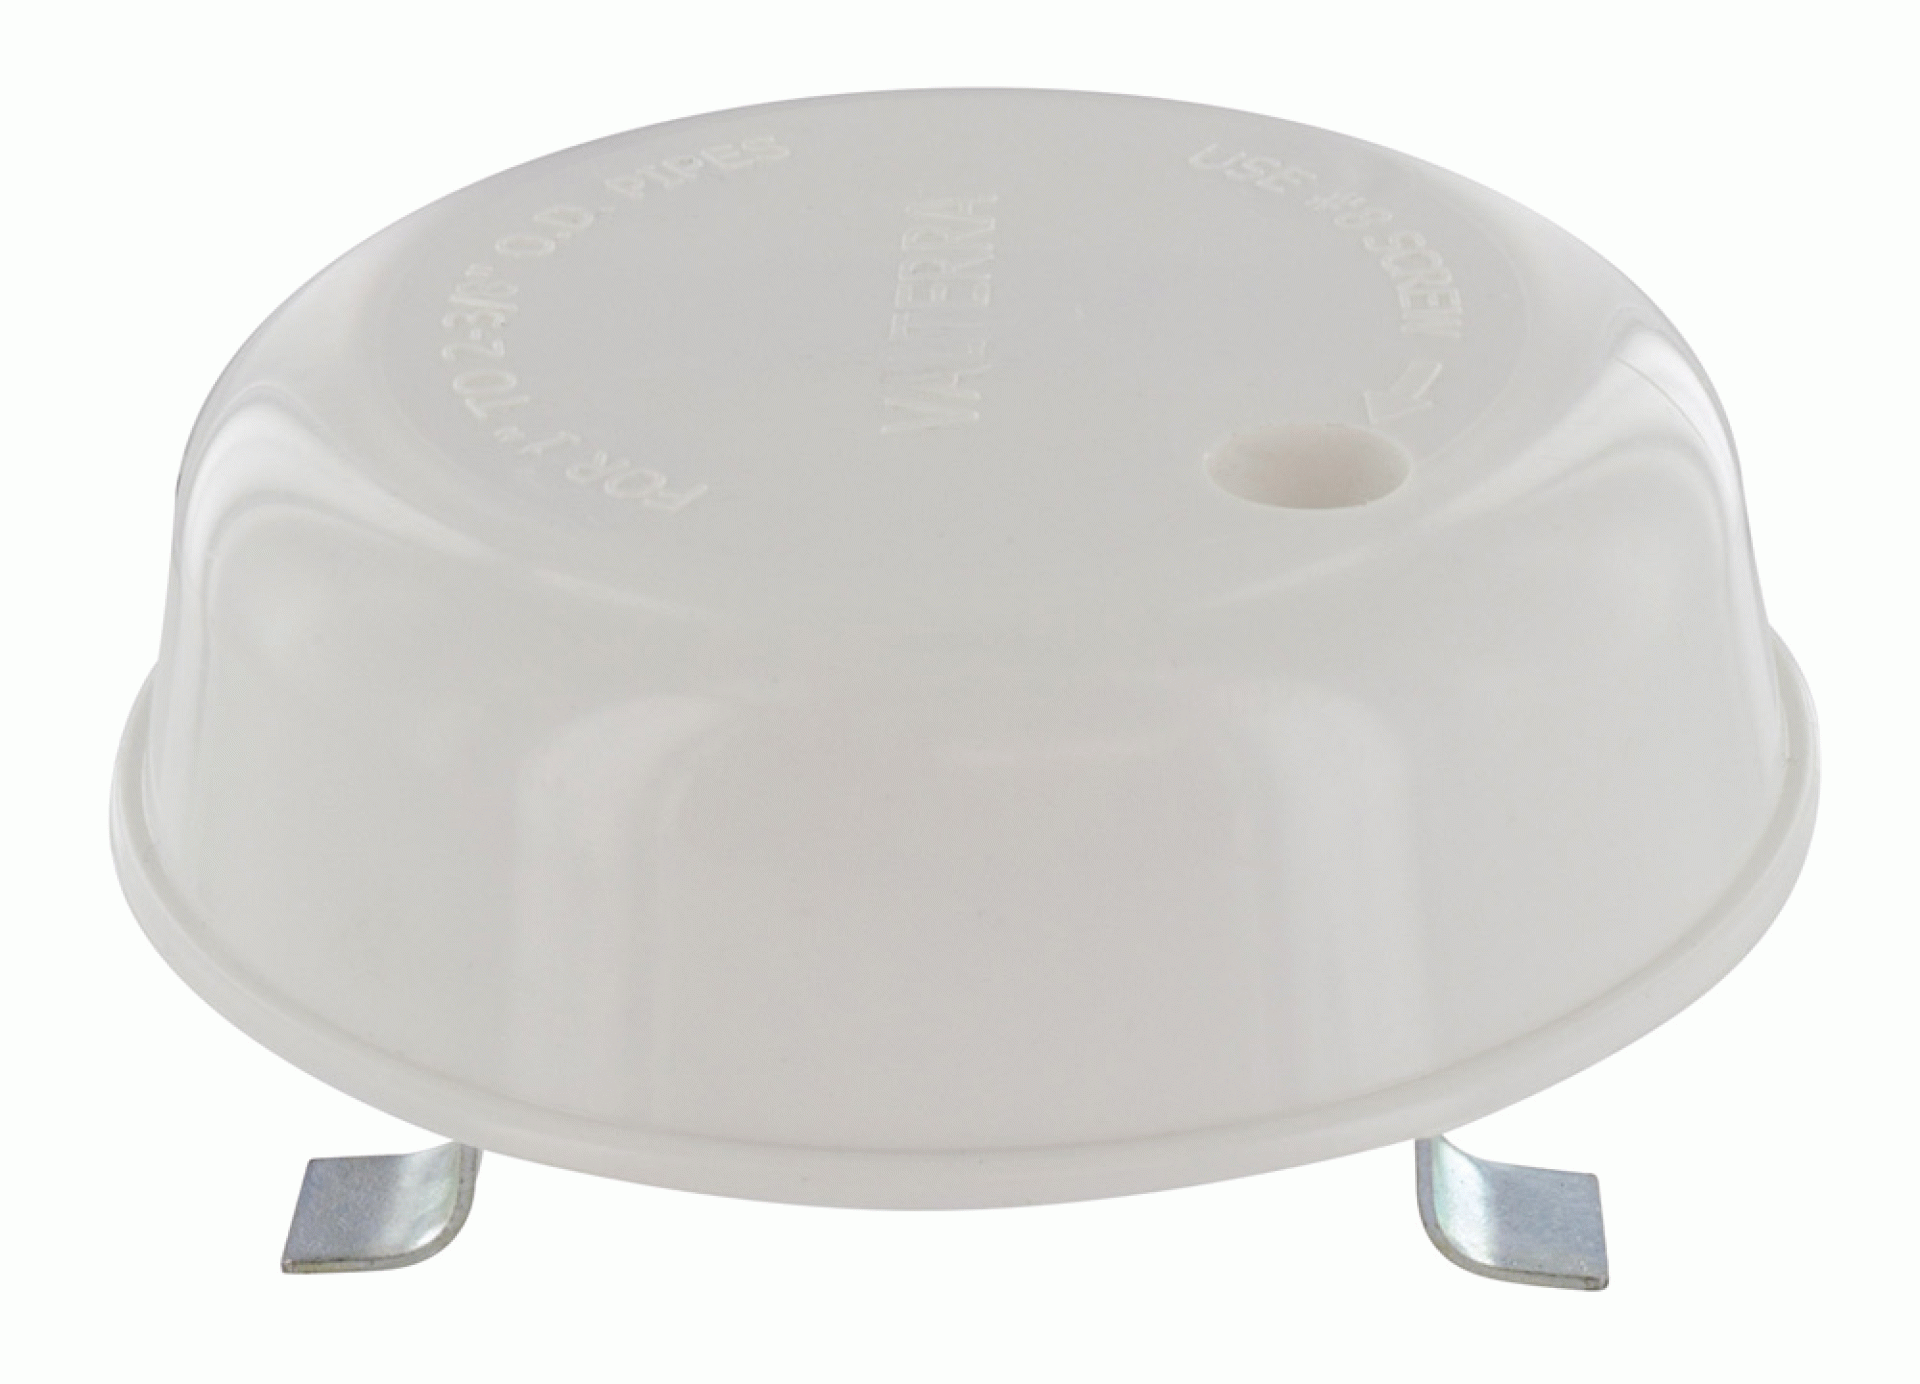 VALTERRA PRODUCTS INC. | A10-3388 | Universal Plumbing Vent - White